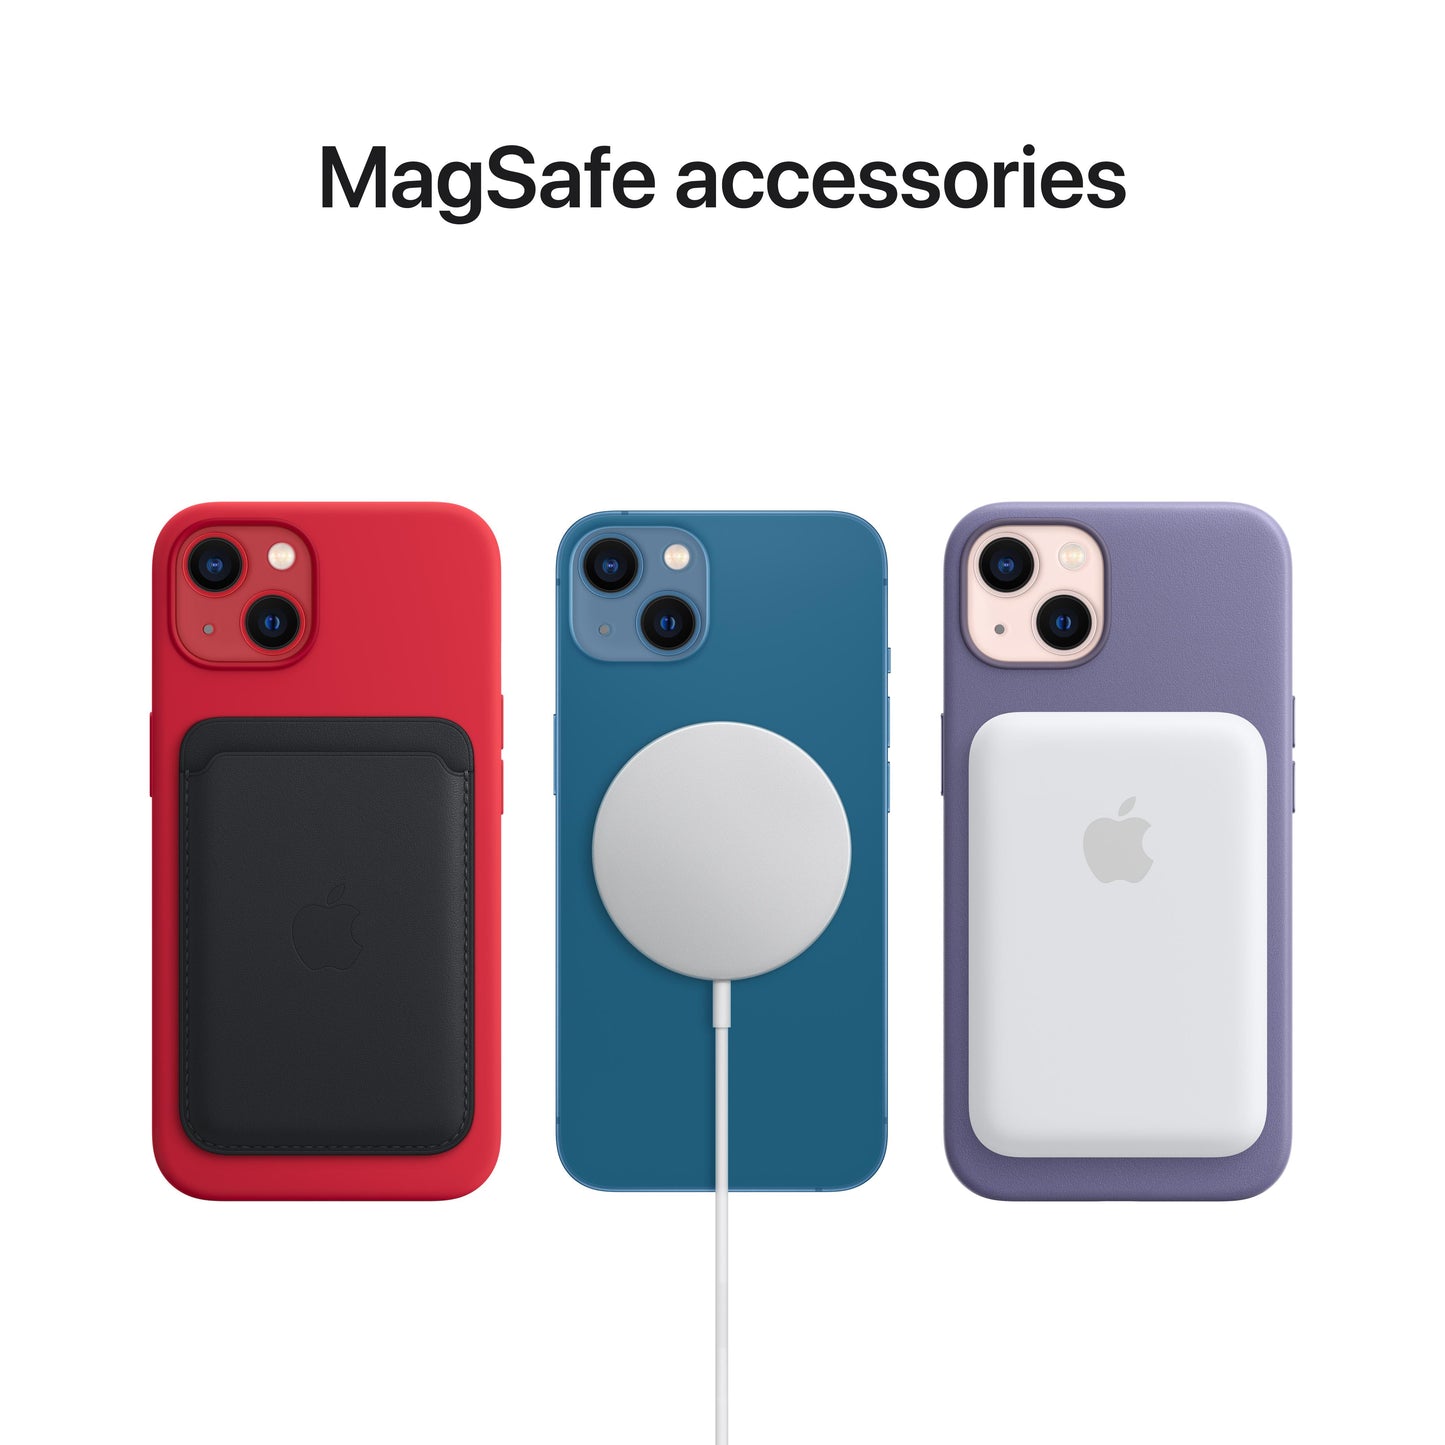 iPhone 13 Silicone Case with MagSafe – Clover